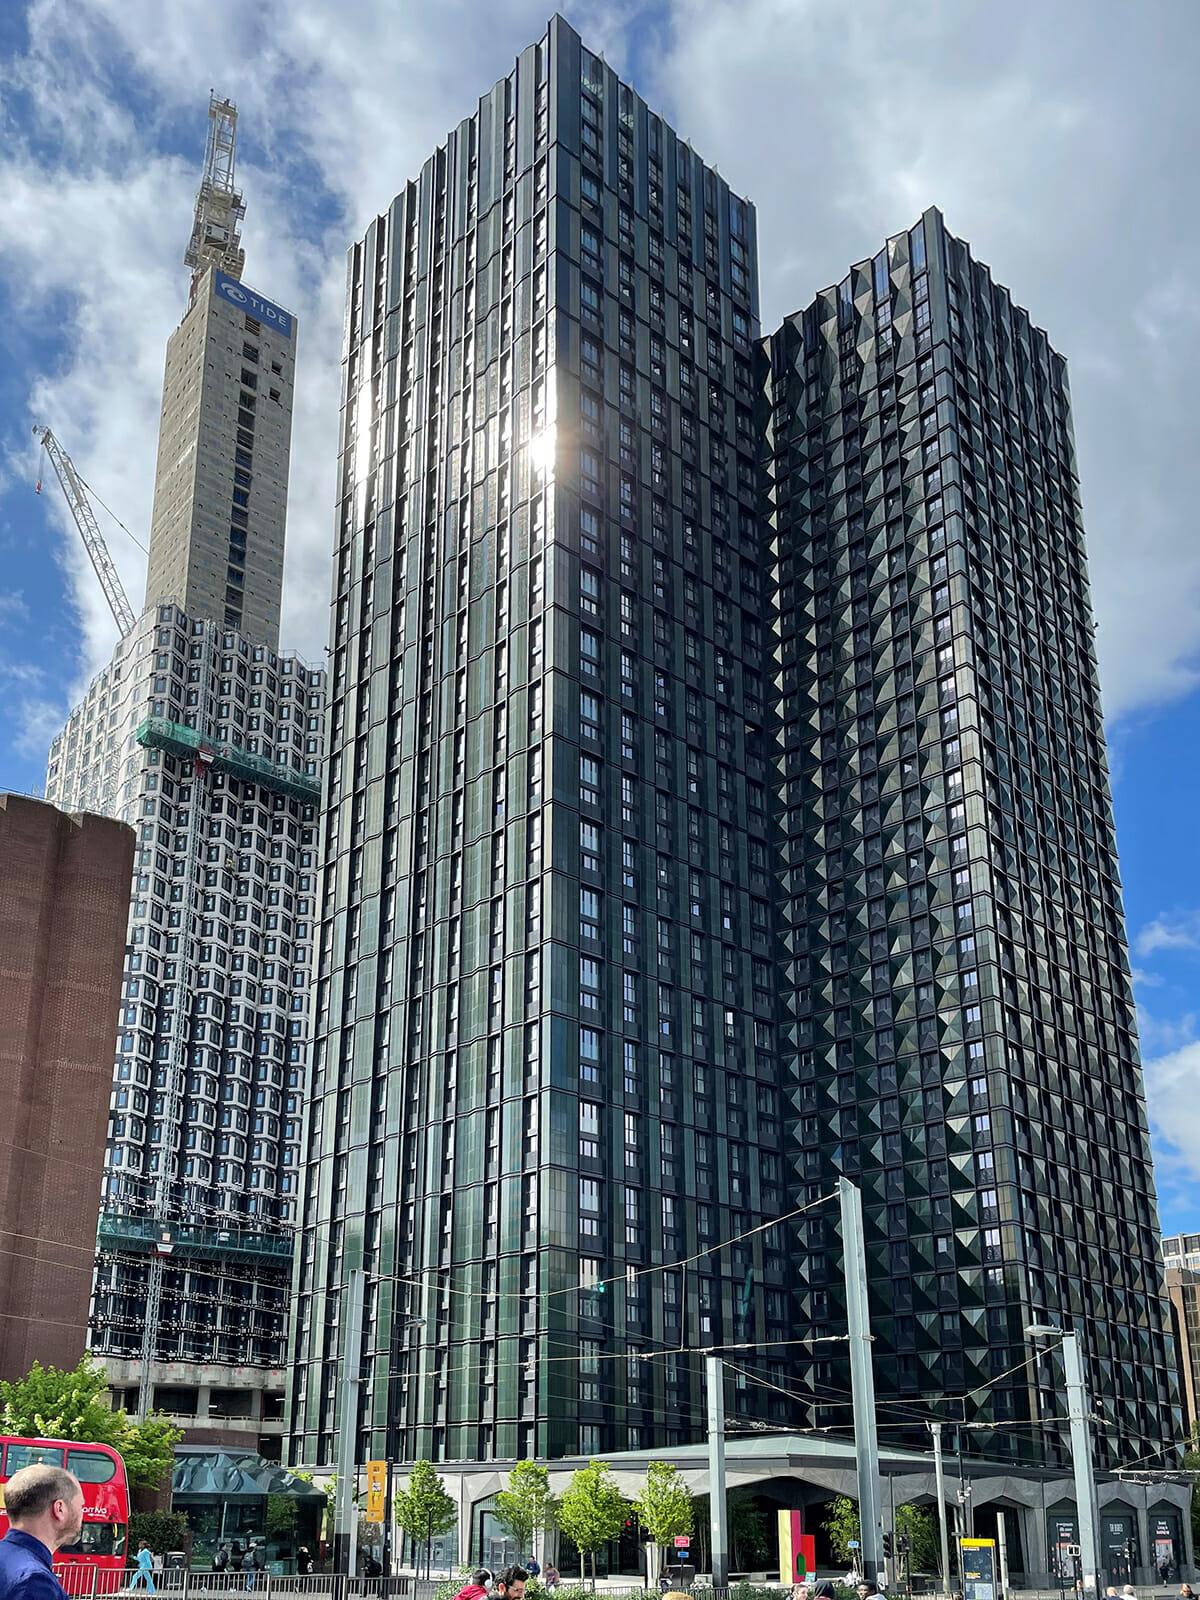 101 George Street is currently the tallest modular building in the world. Photo credit Michael Hough